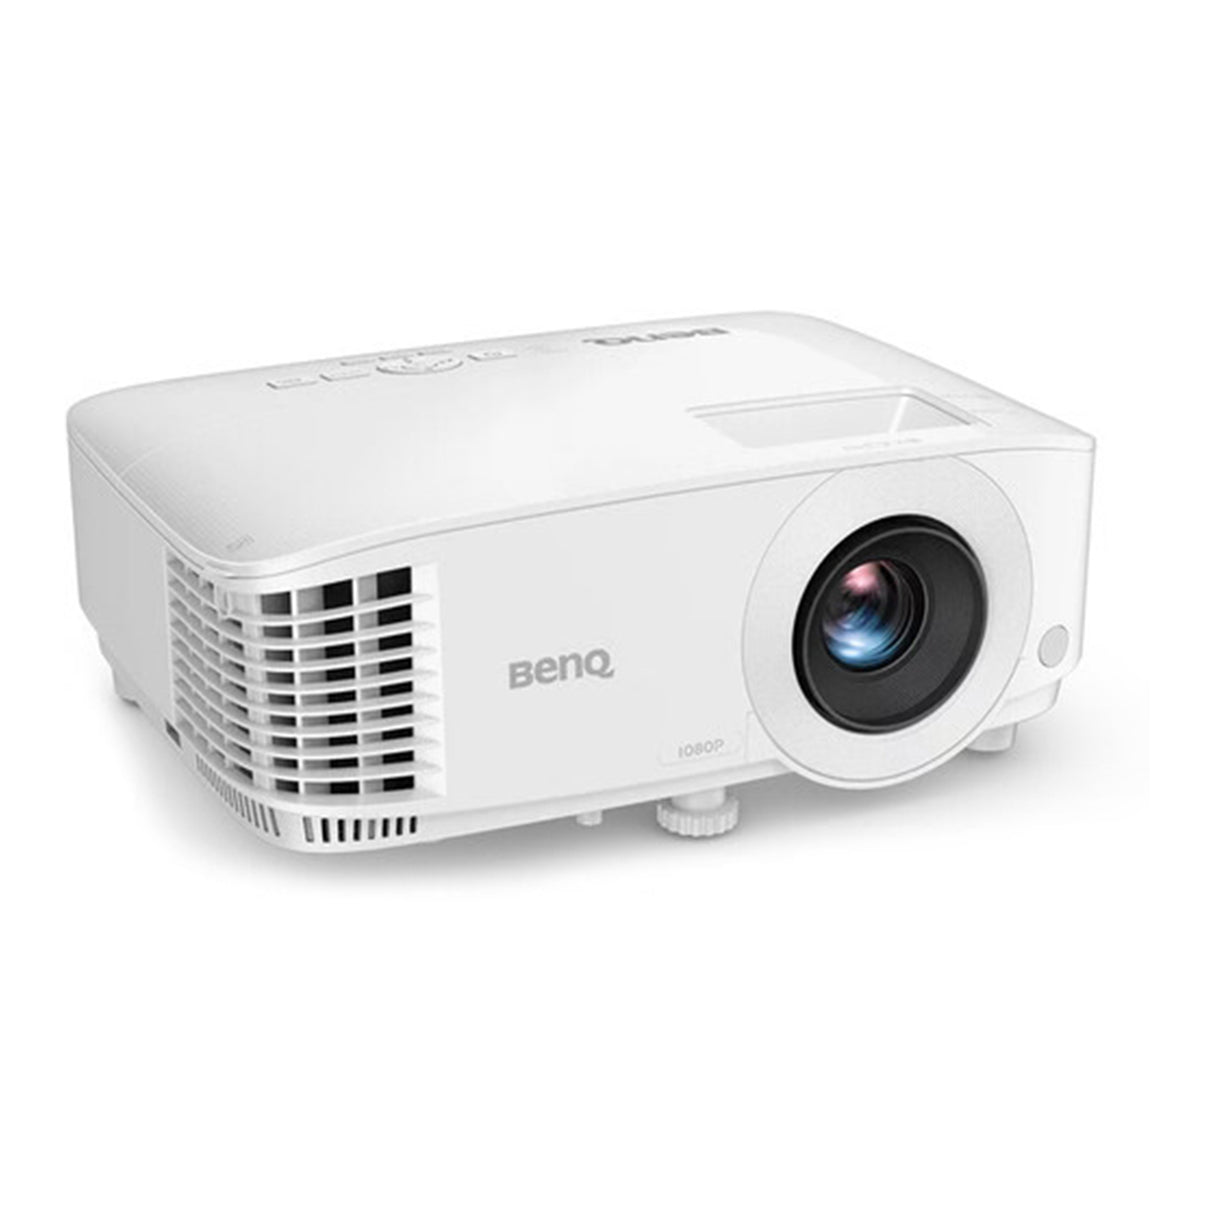 BenQ TH575 - 3800 Lumens HDR 1080p DLP Home Theatre / Gaming Projector